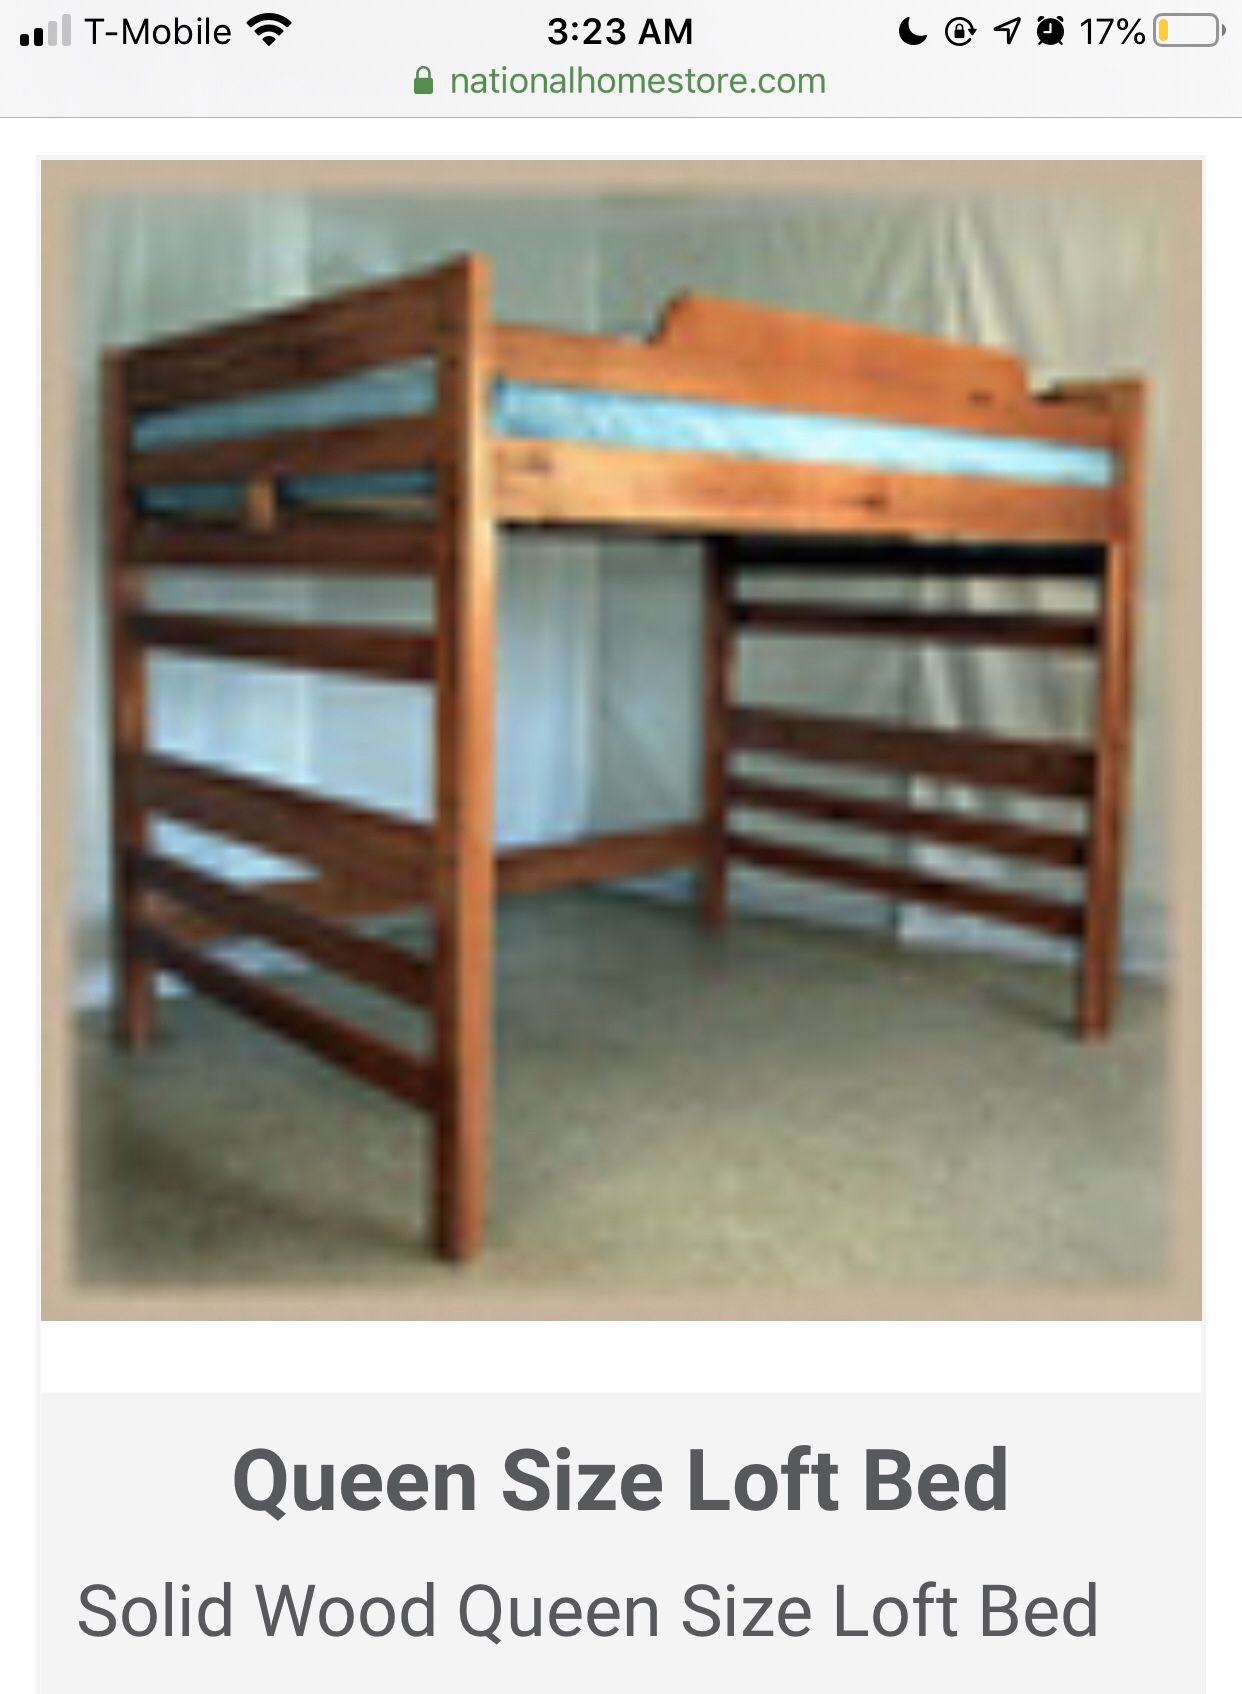 Queen loft bed - was custom made to order